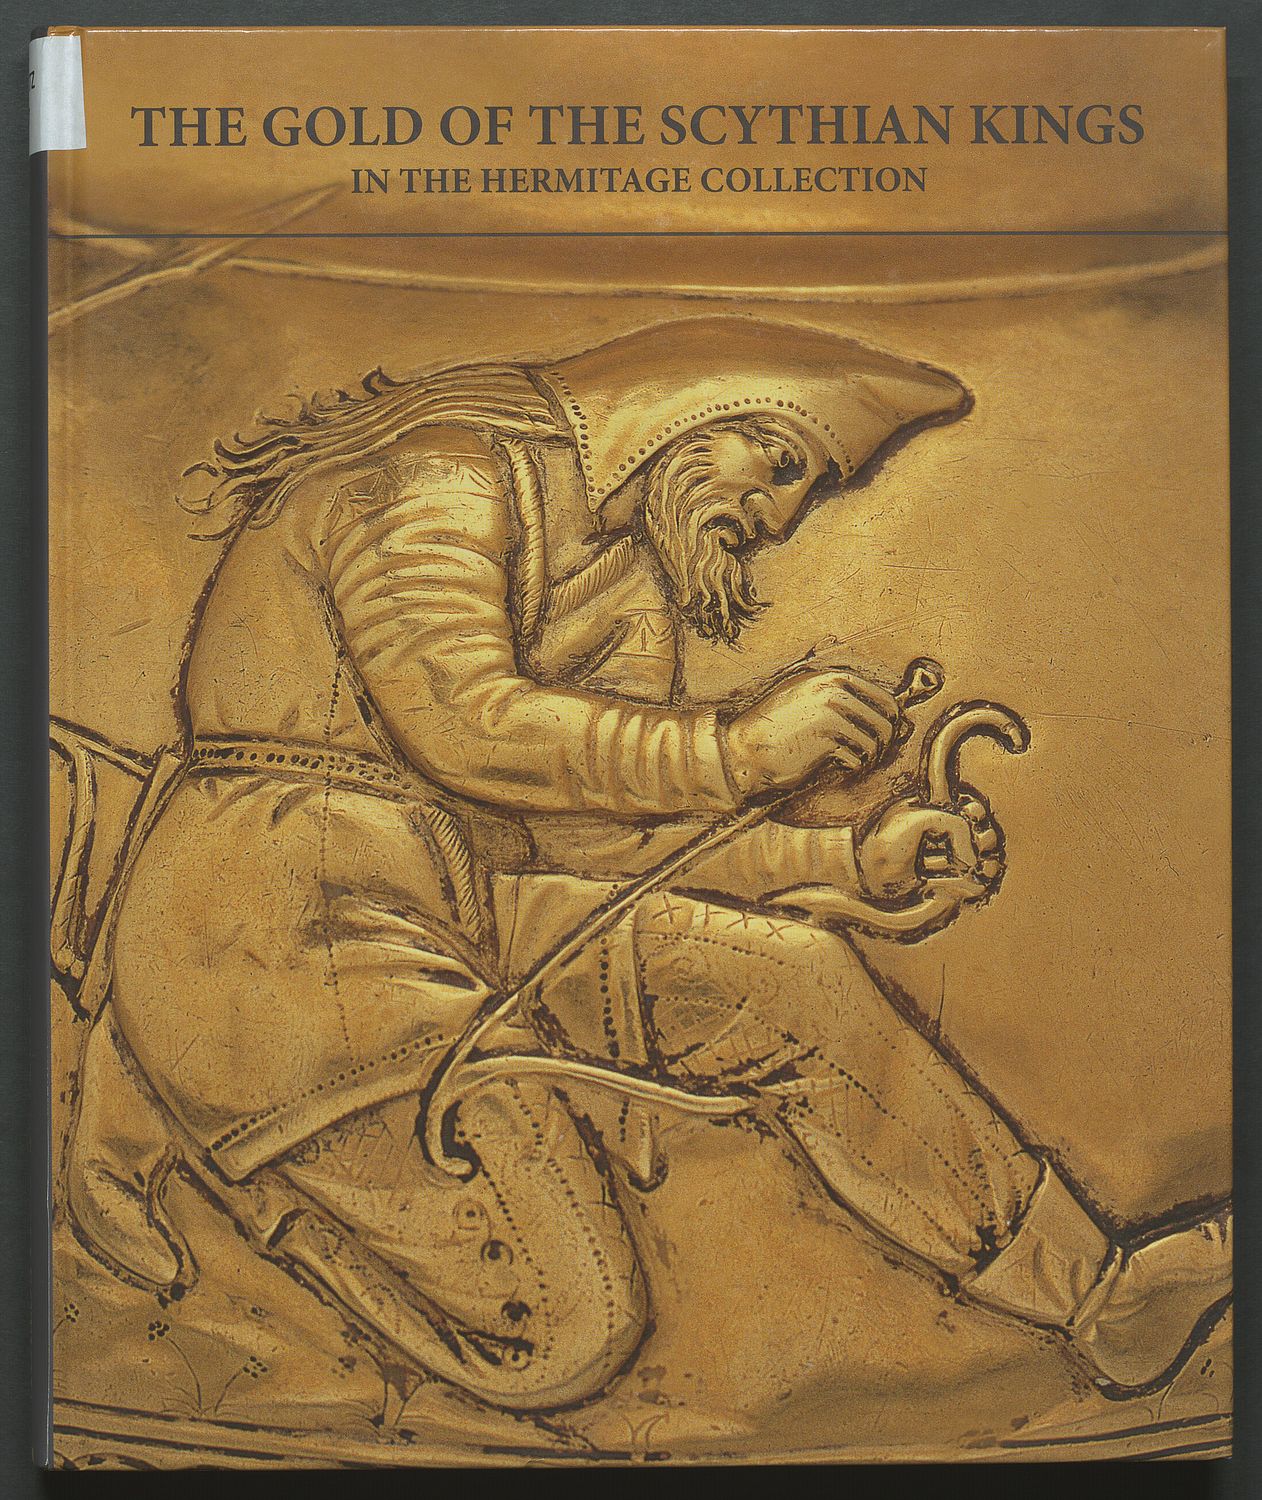 •	The gold of the Scythian kings in the Hermitage collection 